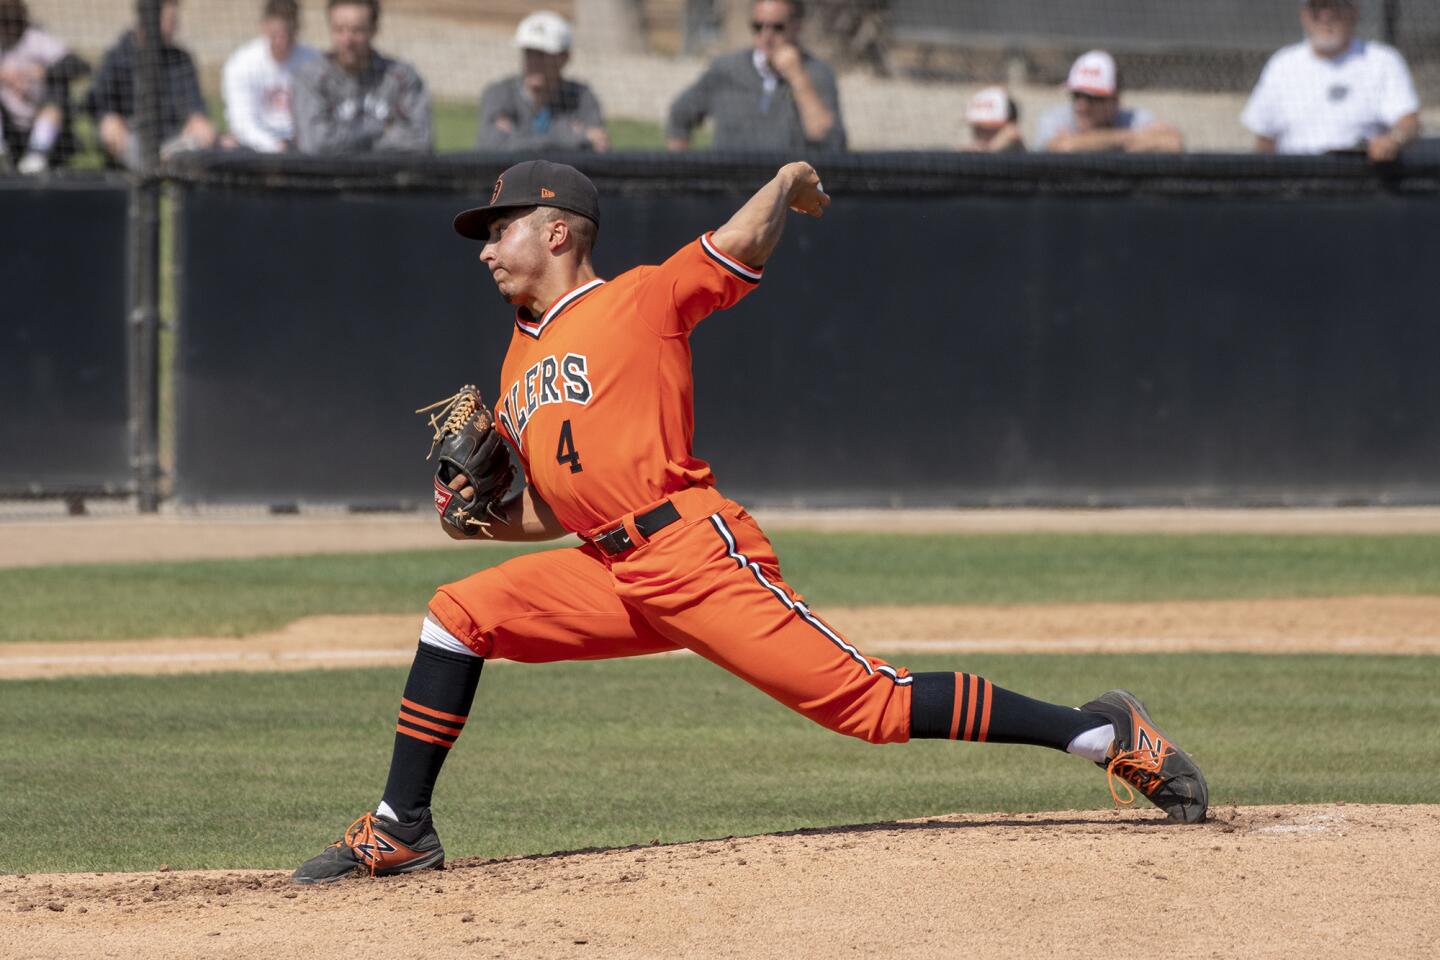 Huntington Beach's Eddie Pelc gets the start during a first round CIF Southern Section Division 1 playoff game against Vista Murrieta on Friday, May 18.